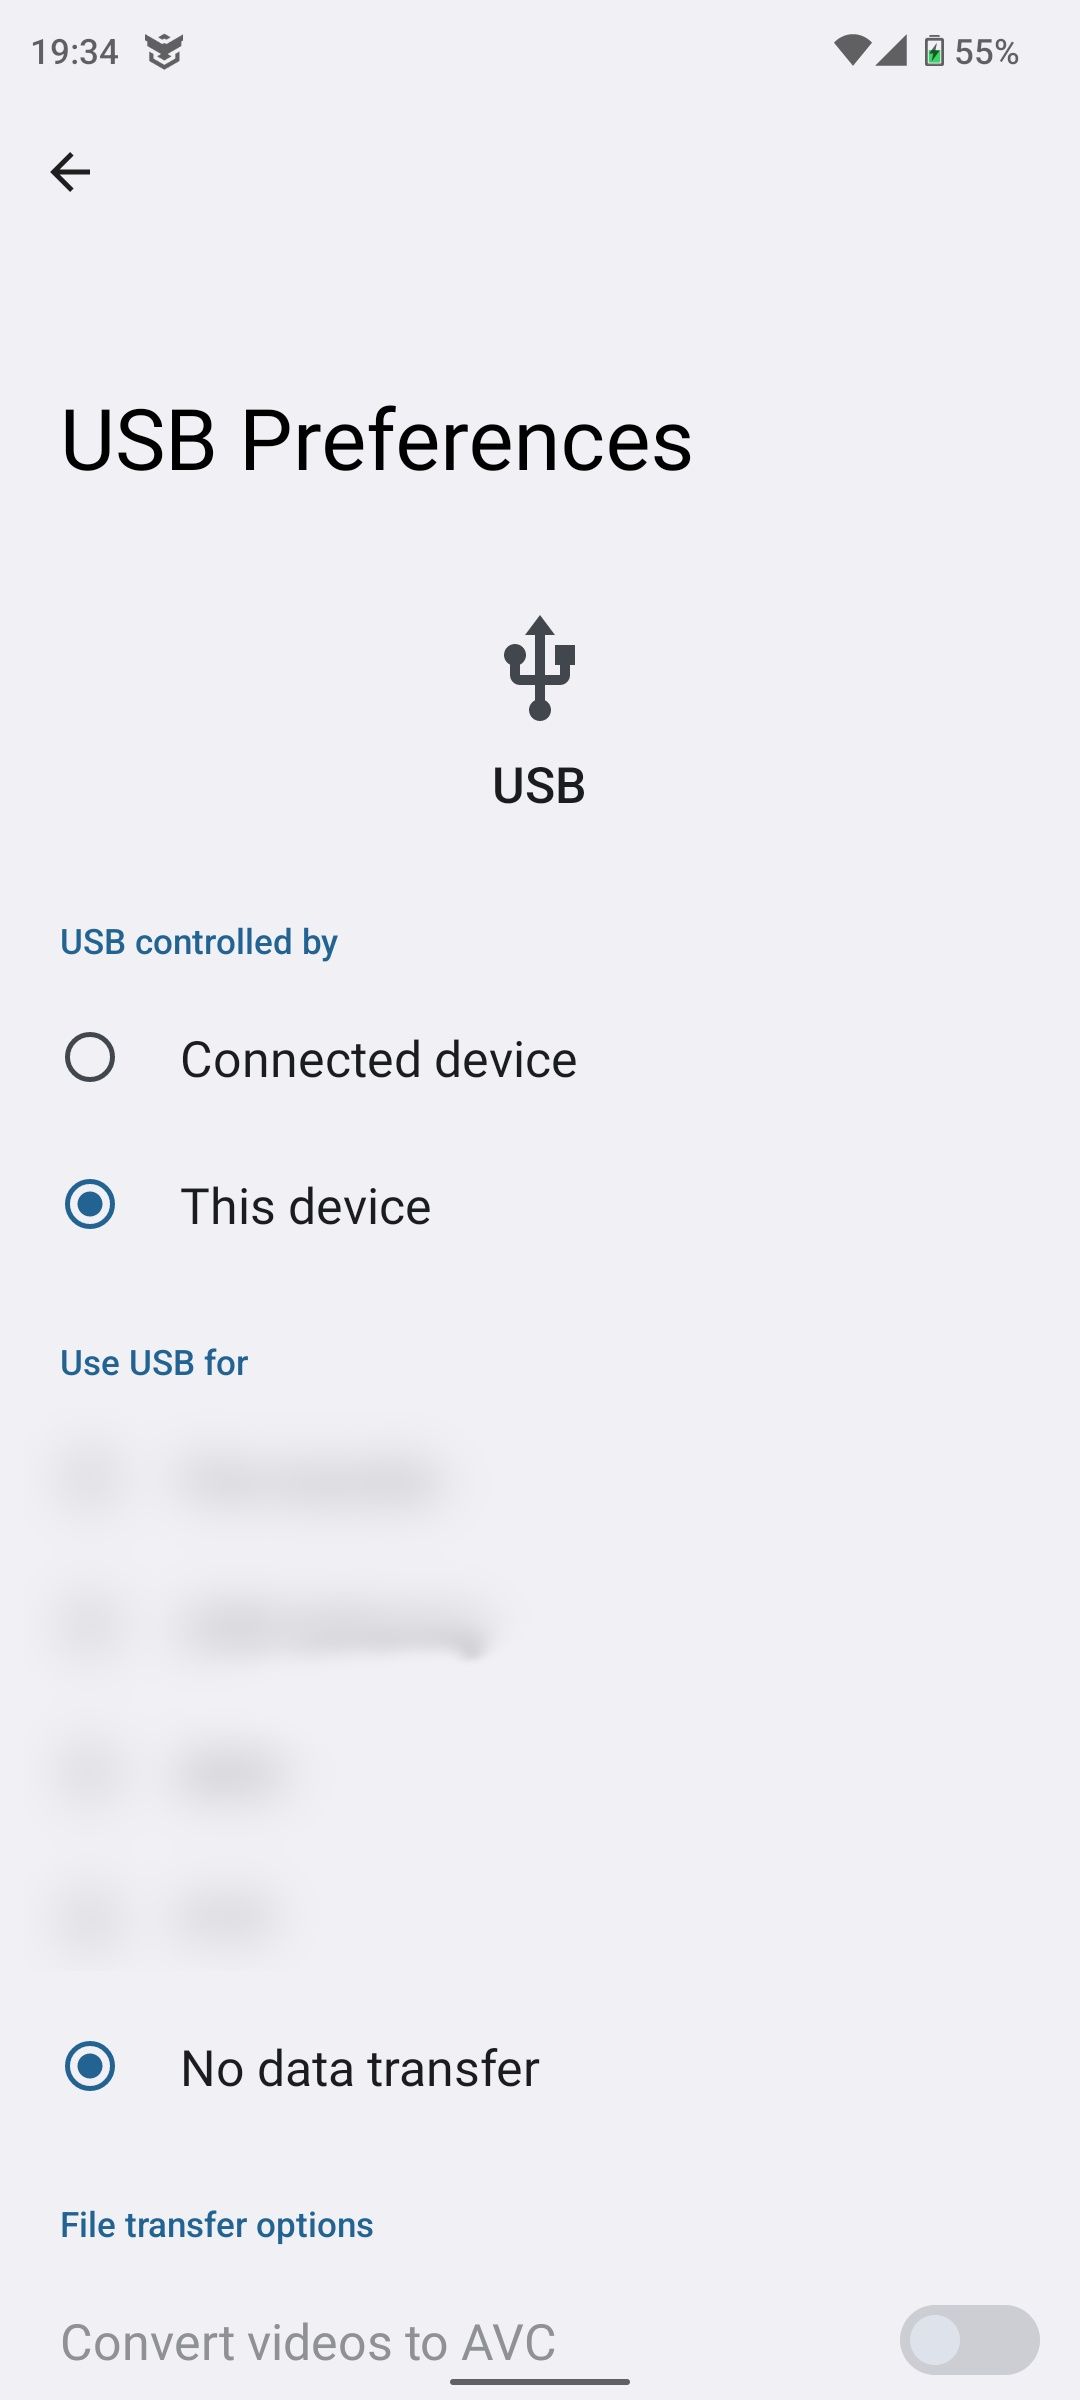 Enable USB file transfer on Android